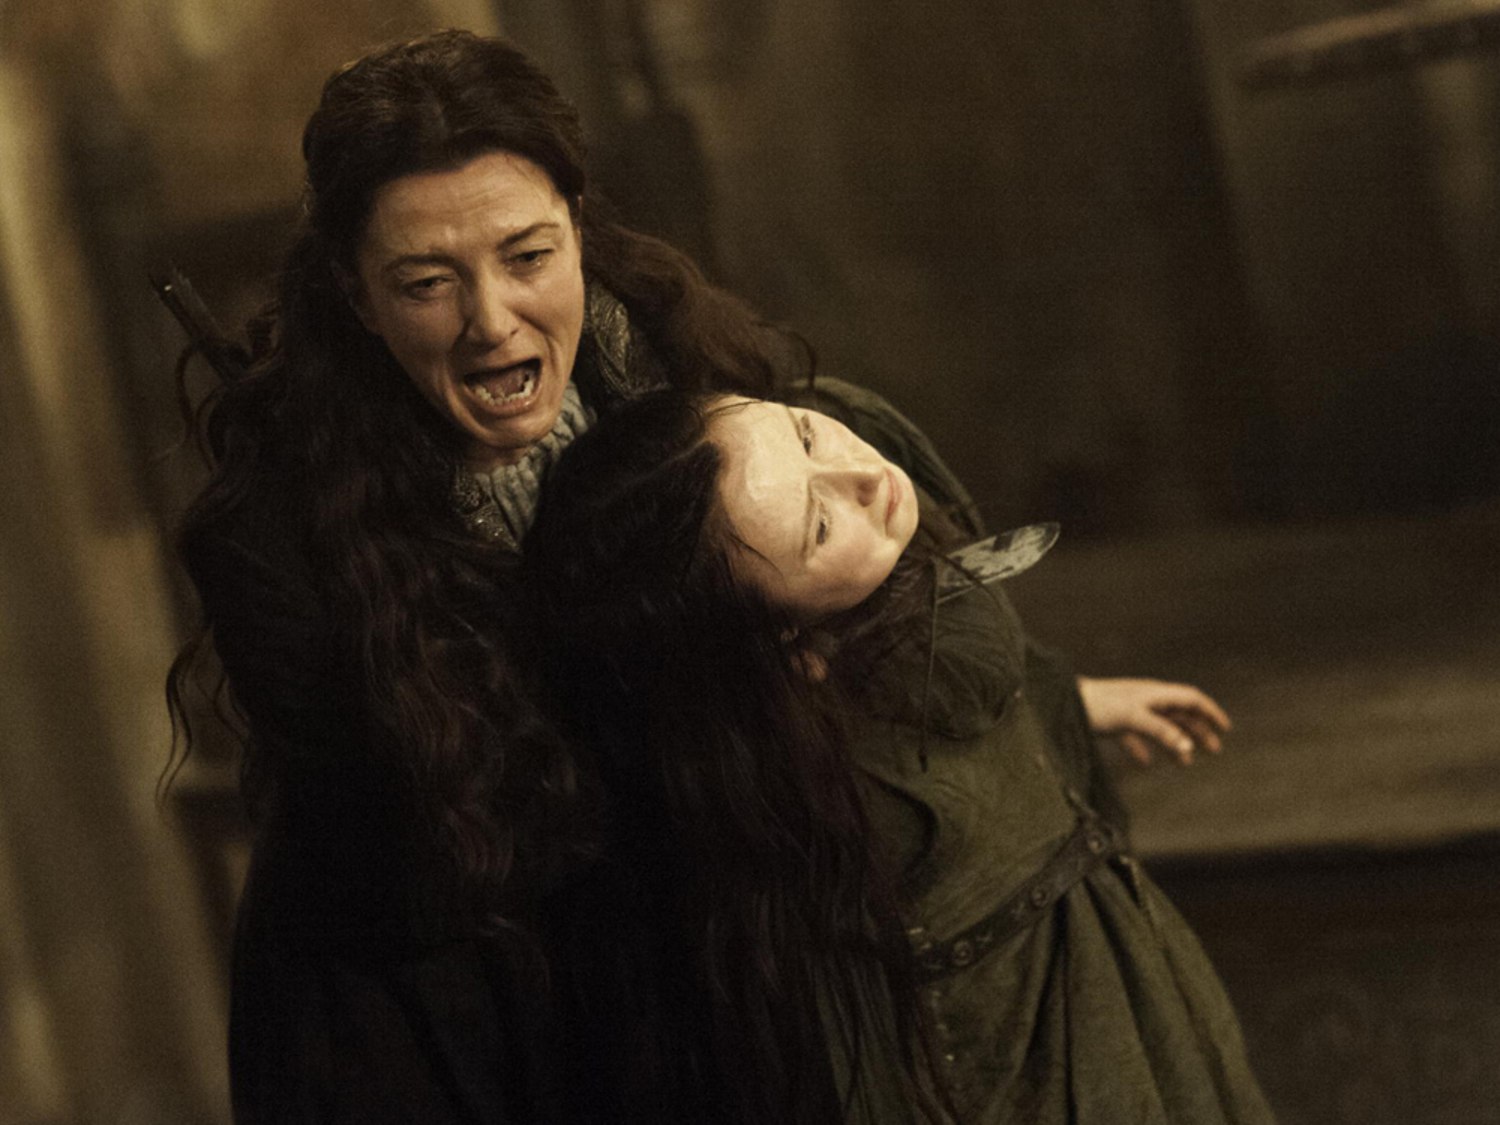 Game of Thrones' star and fans left in tears Red Wedding